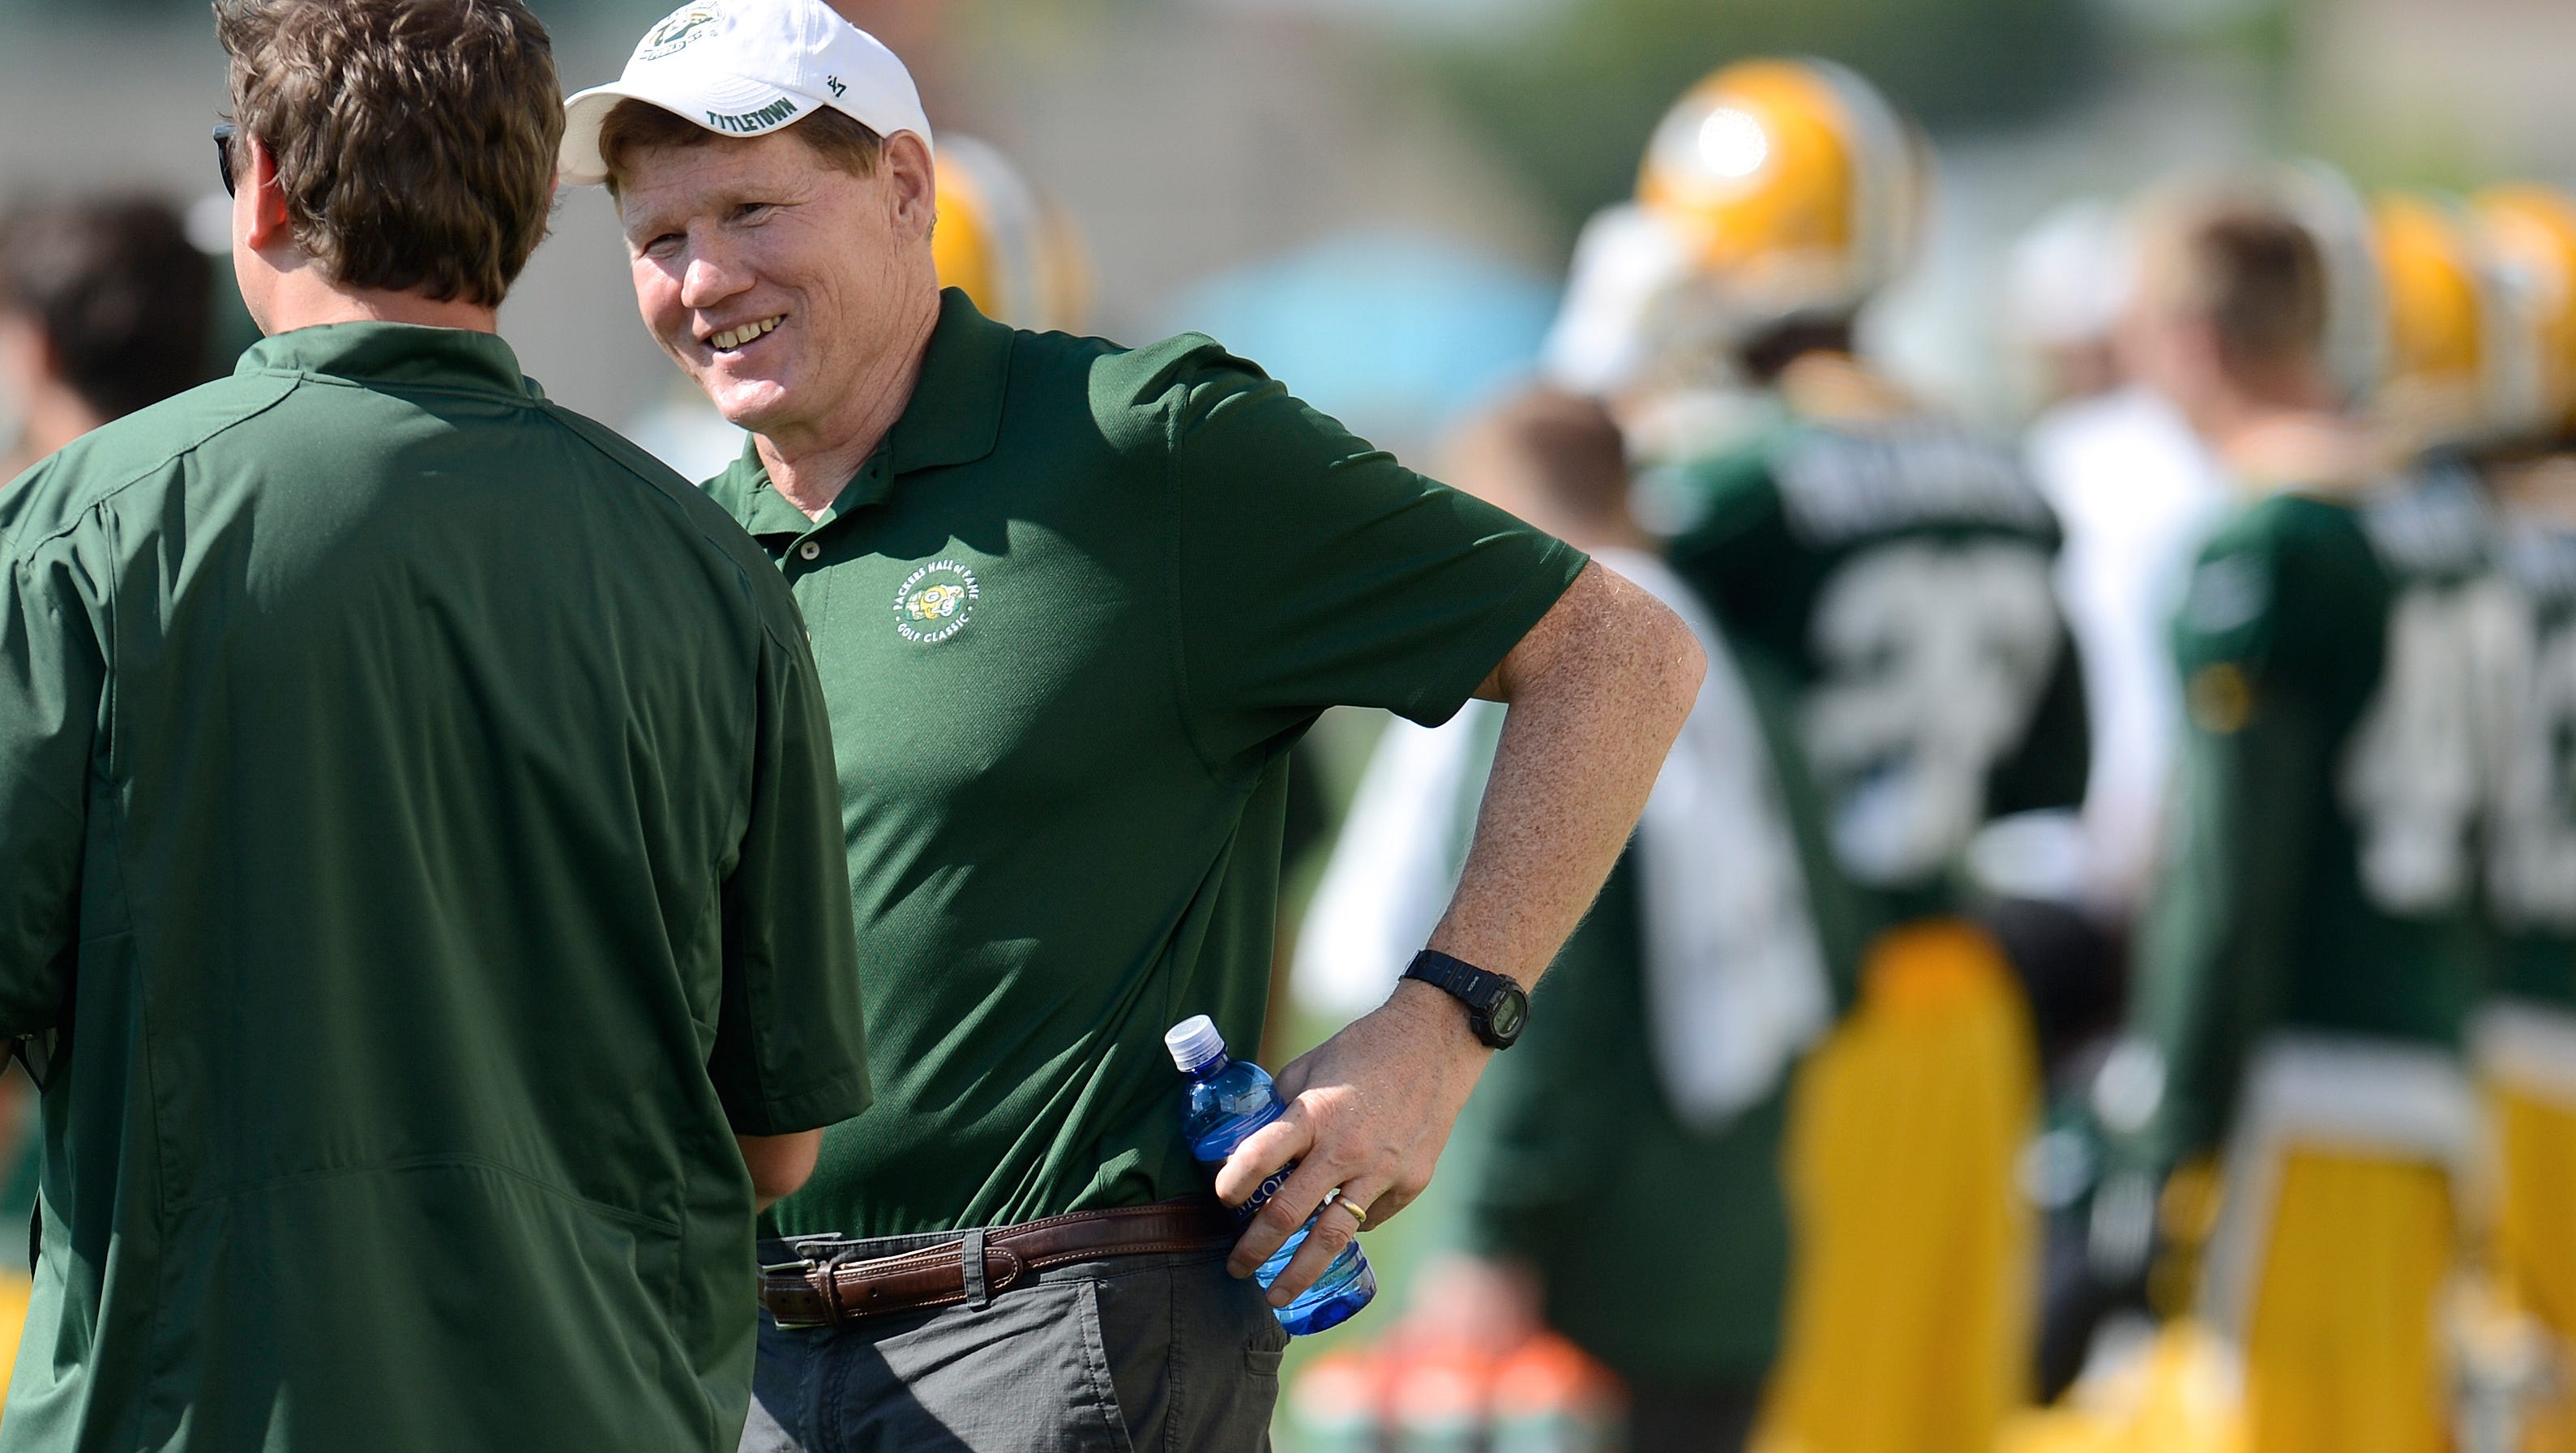 Green Bay Packers President Mark Murphy chats on the sidelines during the second day of Packers training camp at Ray Nitschke Field in Green Bay, Wis. on Sunday, July 27, 2014.  Kyle Bursaw / Press-Gazette Media